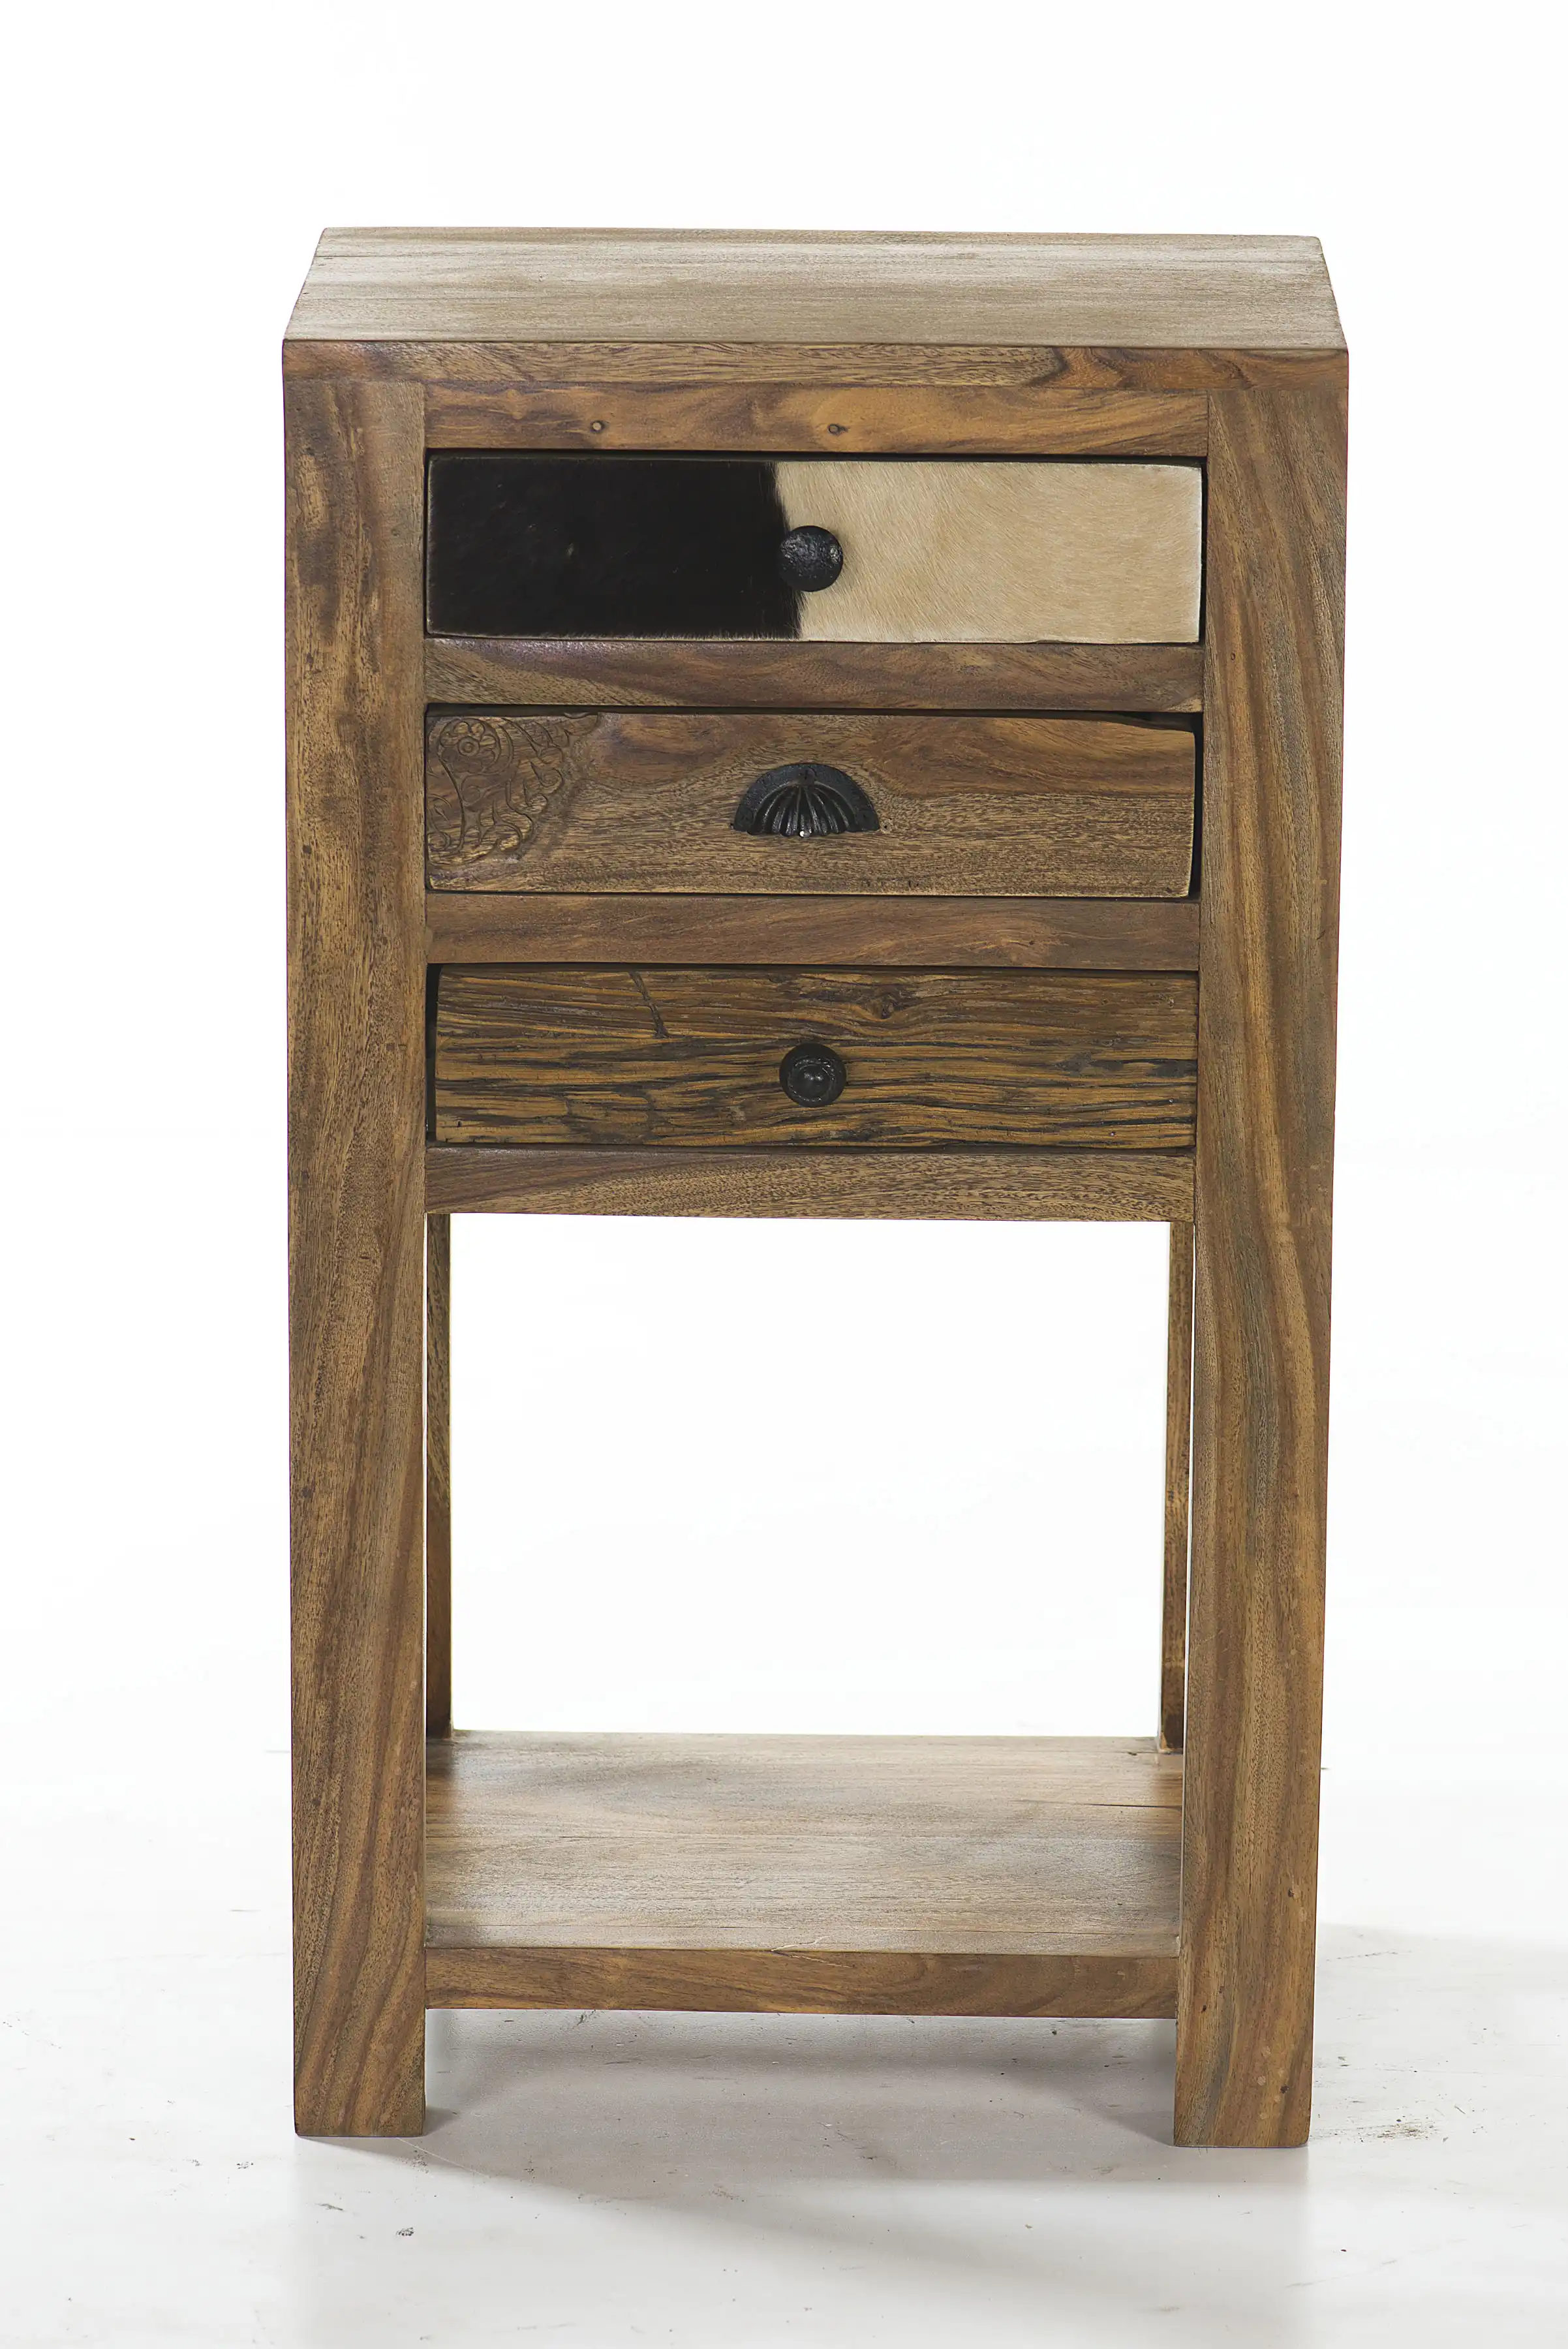 Wood Side Table with 3 Drawers - popular handicrafts